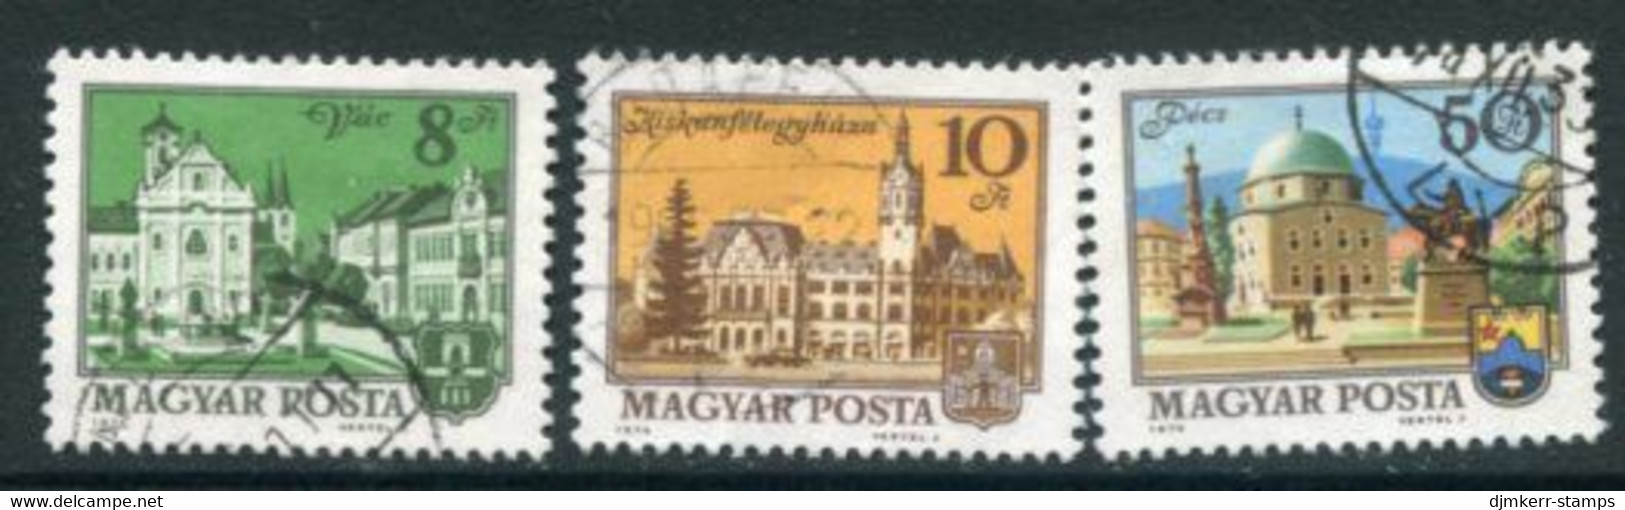 HUNGARY 1974 Towns Definitive 8, 10, 50 Ft. Used.  Michel 3001-003 - Usado